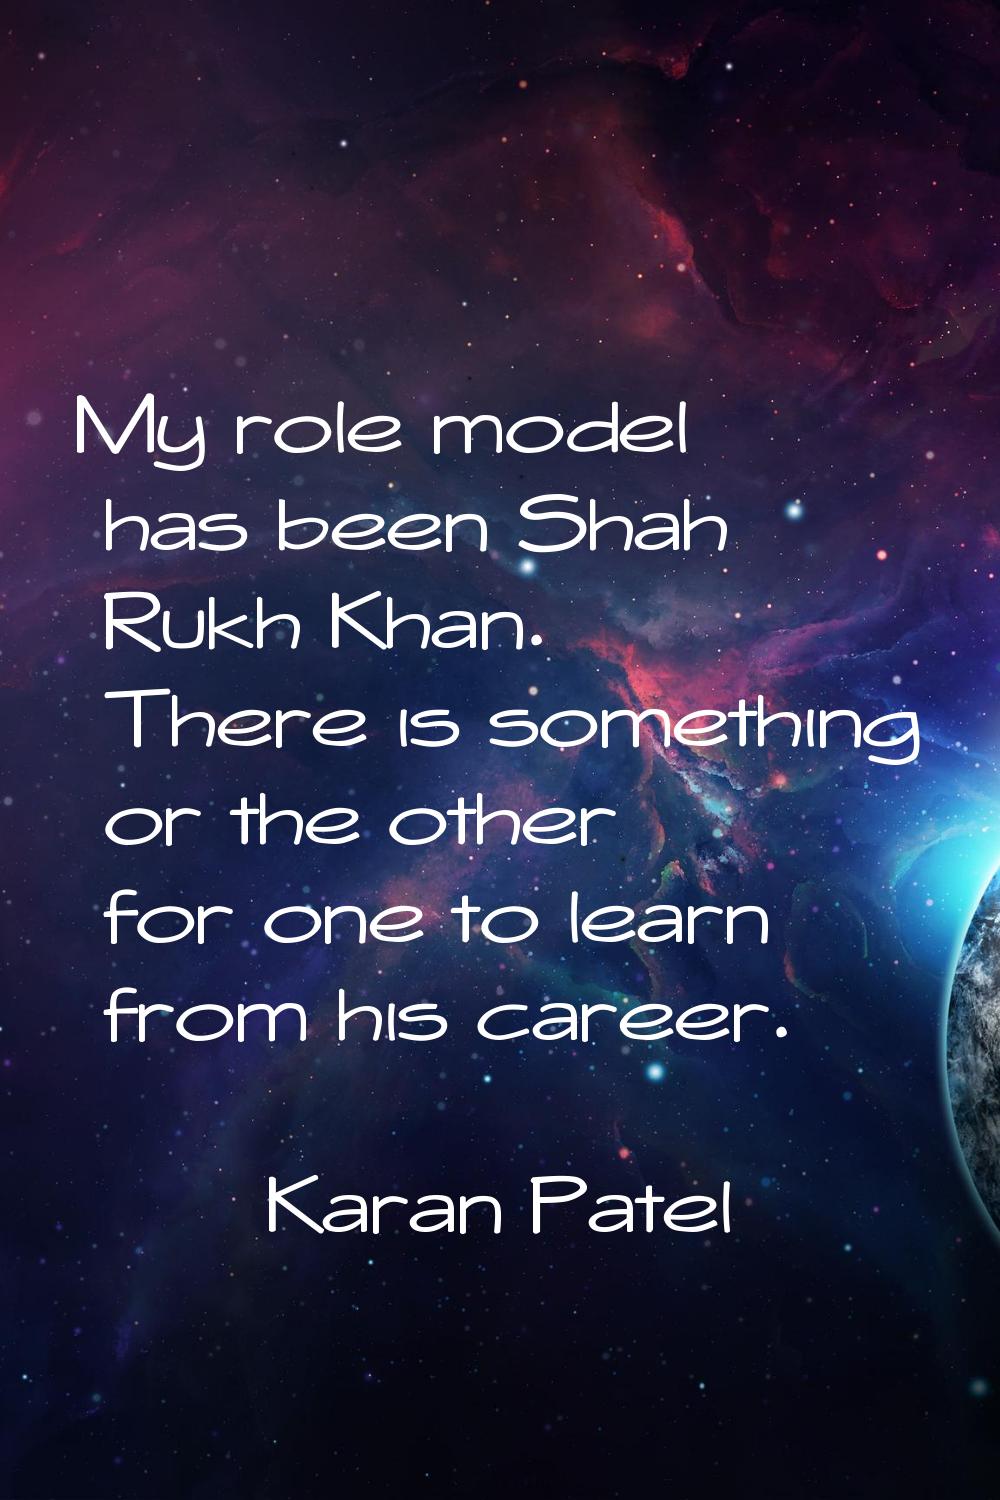 My role model has been Shah Rukh Khan. There is something or the other for one to learn from his ca